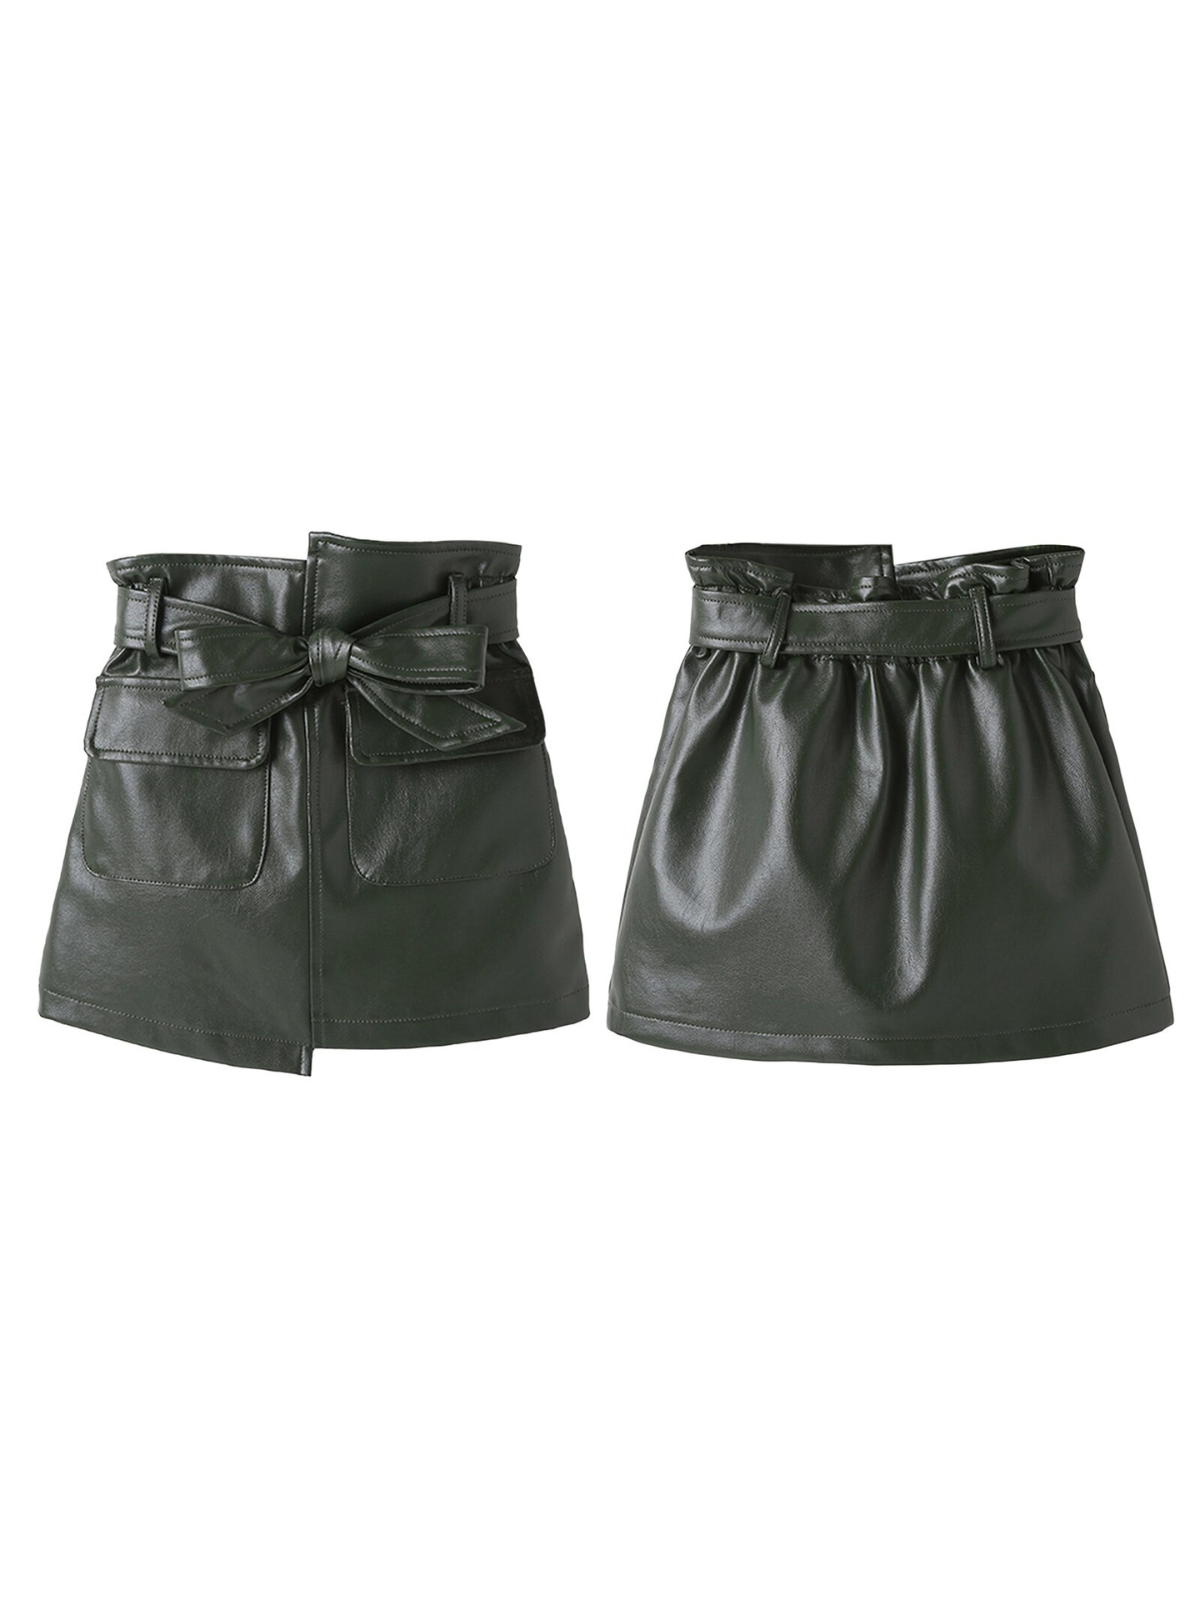 Toddler Clothing Sale | PU Leather Tie Front Skirt | Girls Boutique